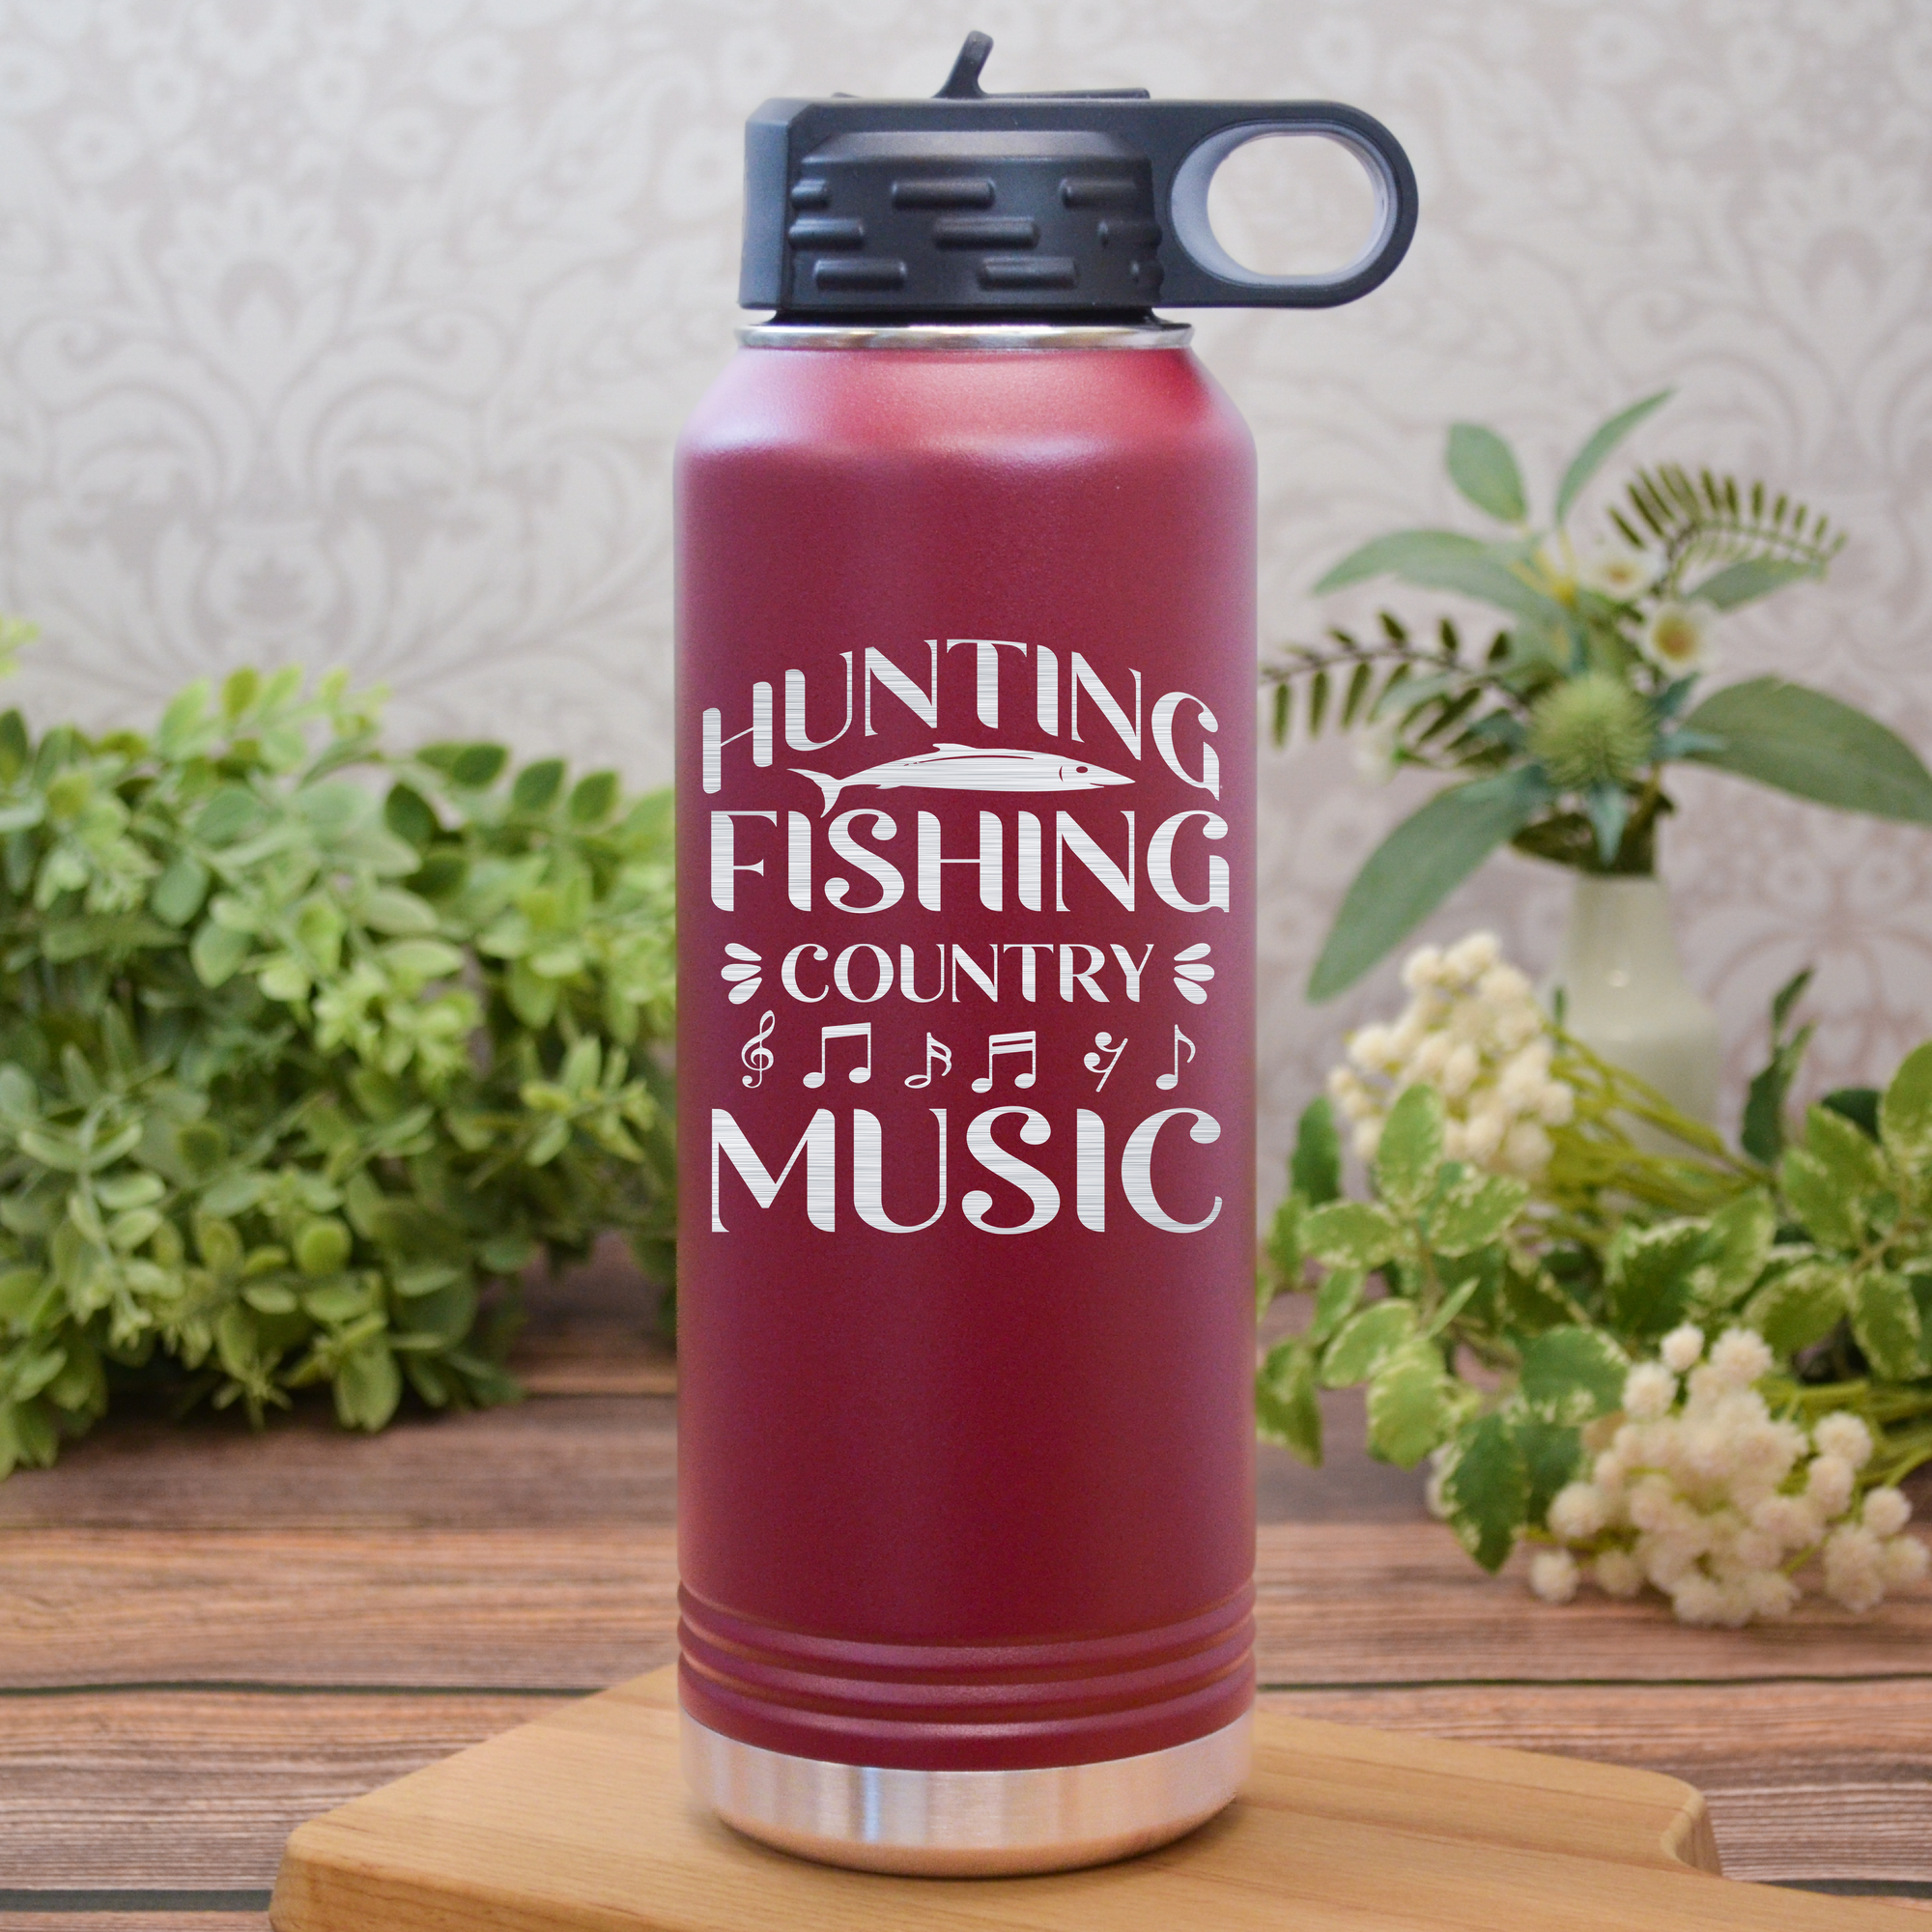 Hunting Fishing And Country Music Water Bottle